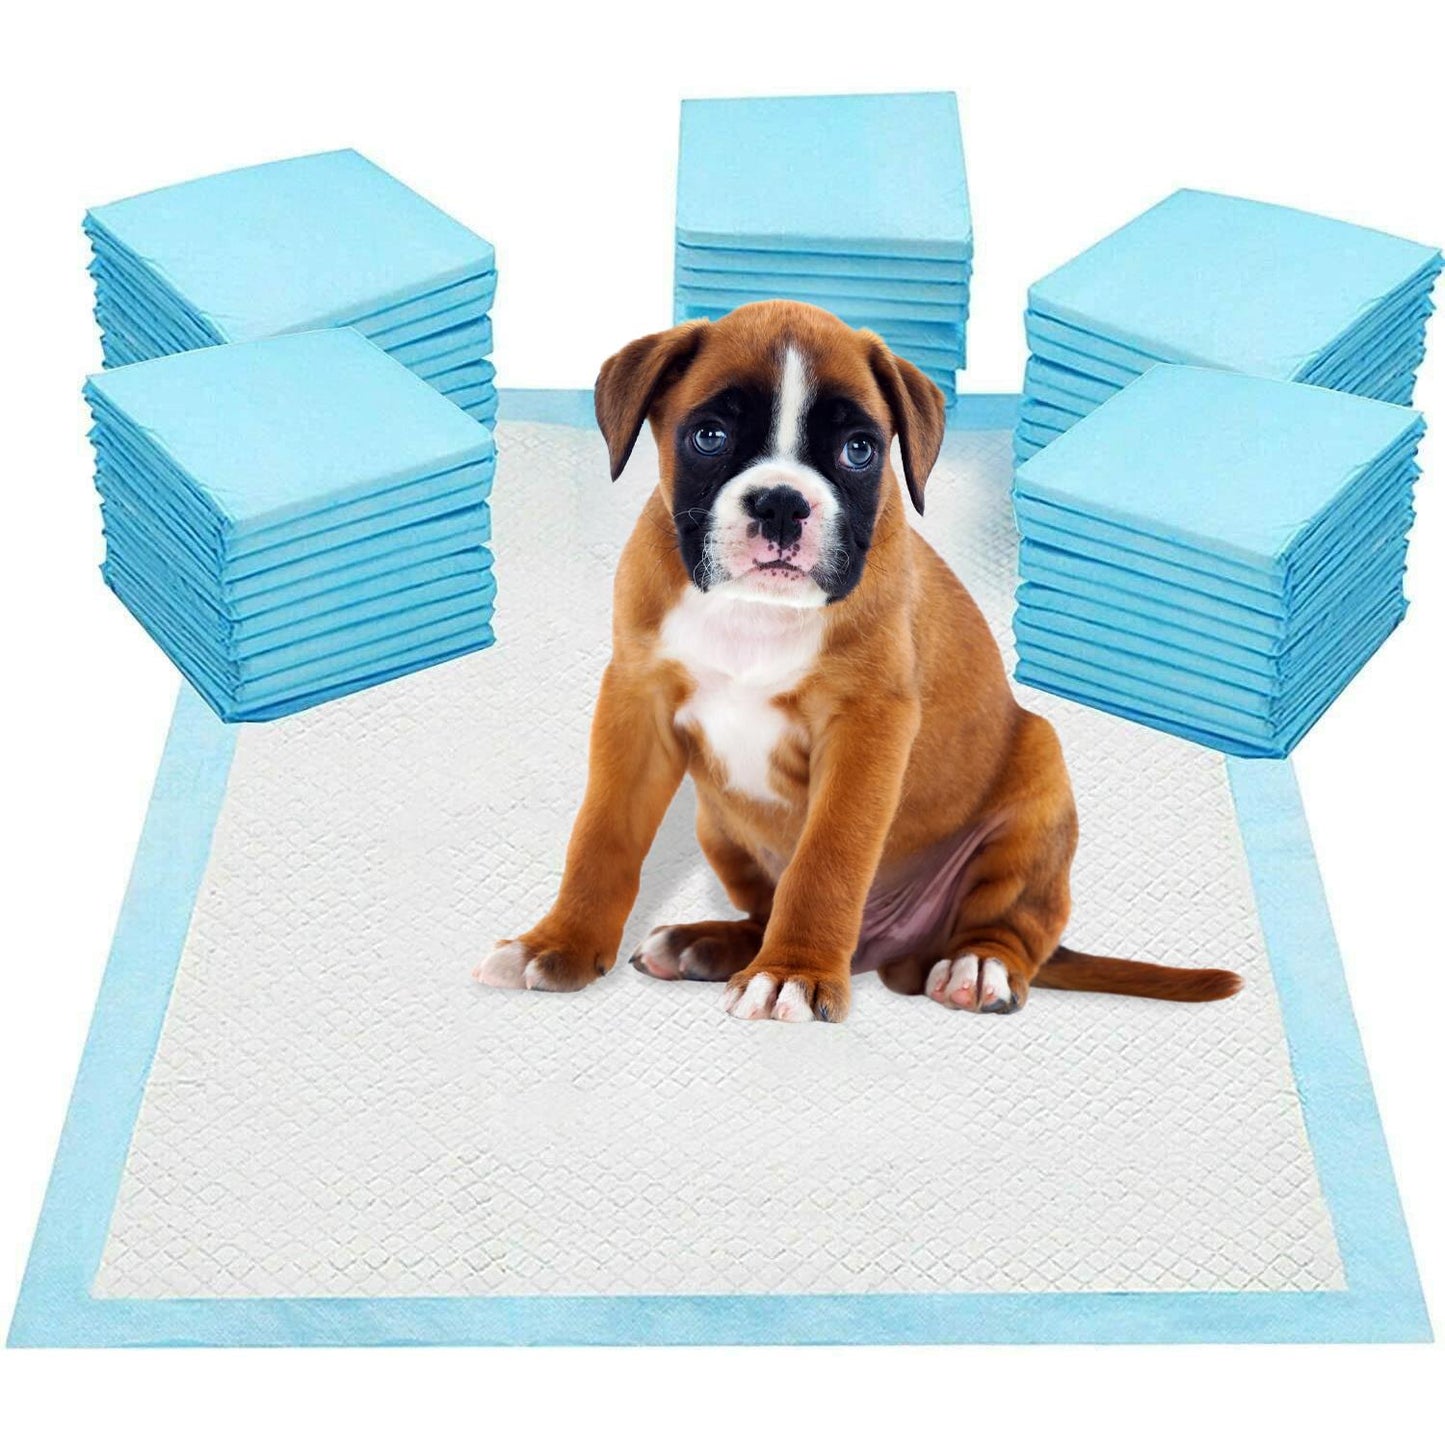 Large Training Pads for Dogs by Geezy - UKBuyZone